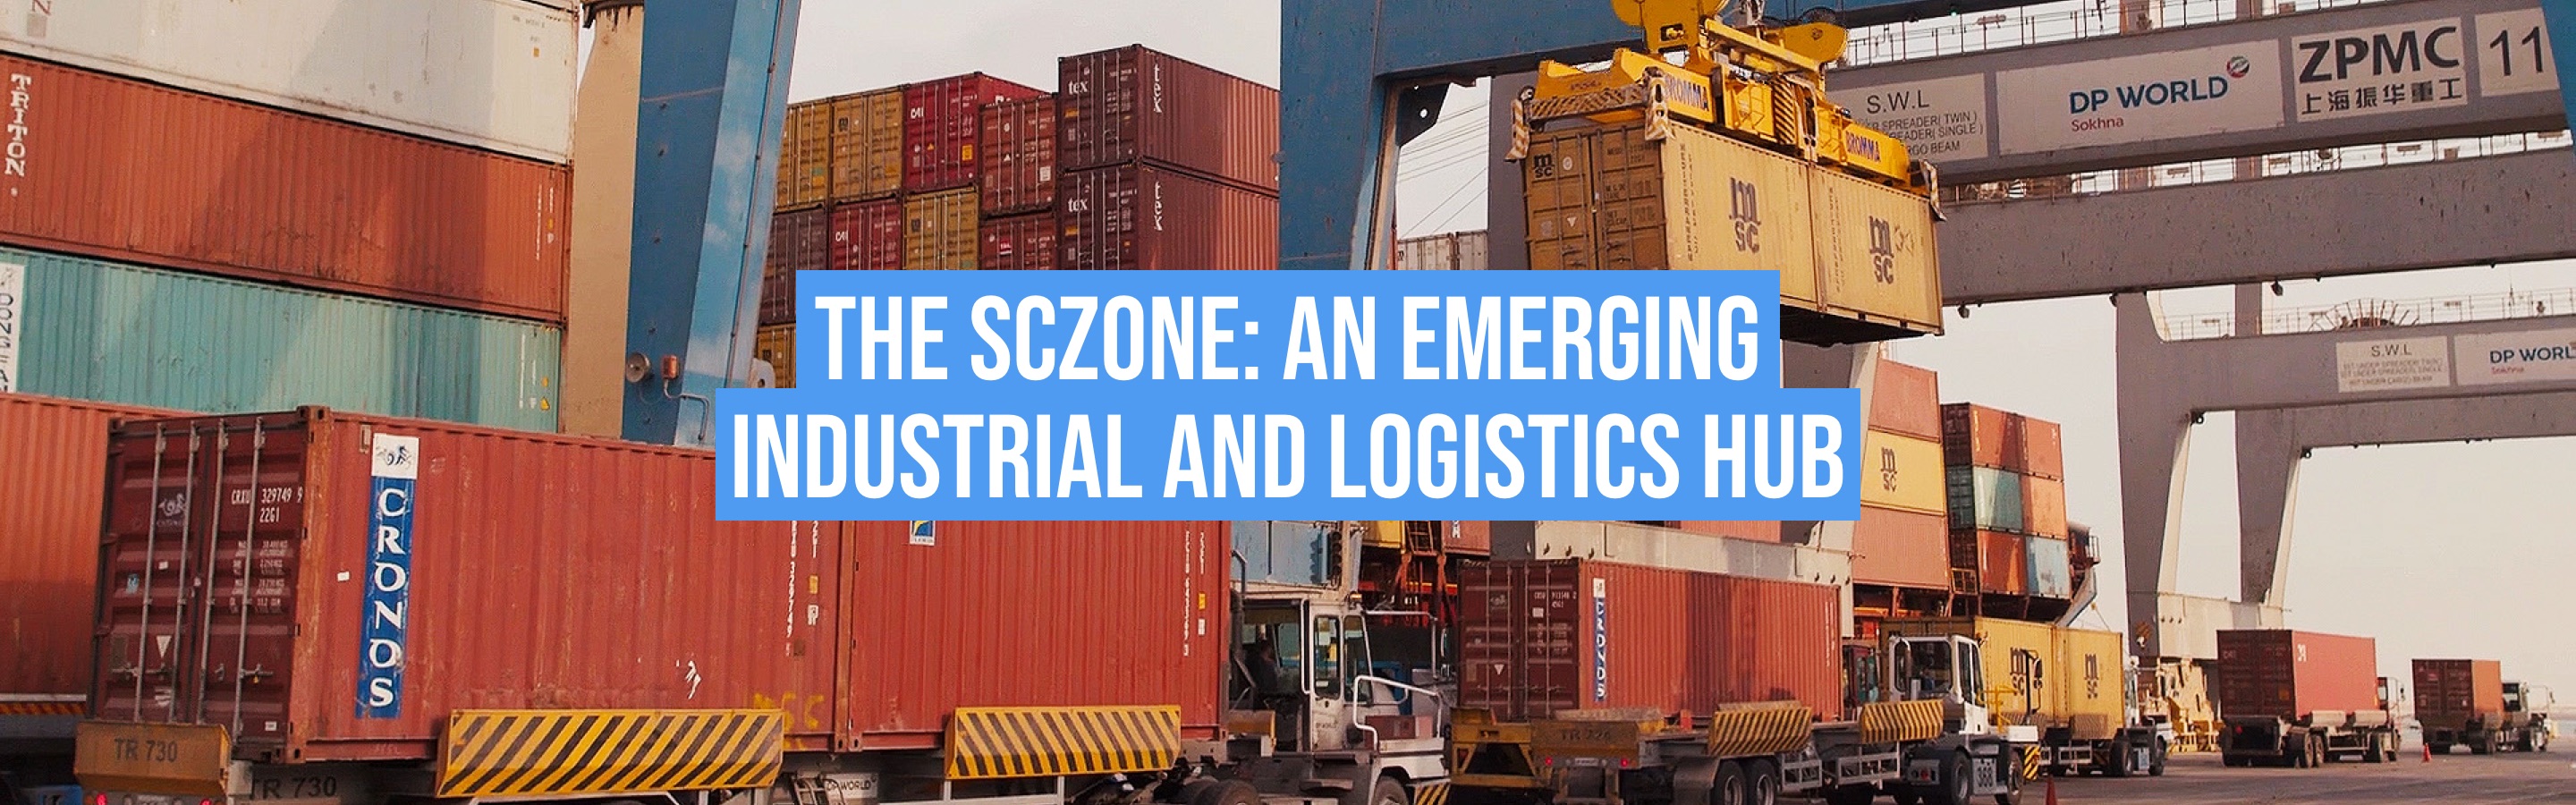 The SCZONE: An Emerging Industrial and Logistics Hub